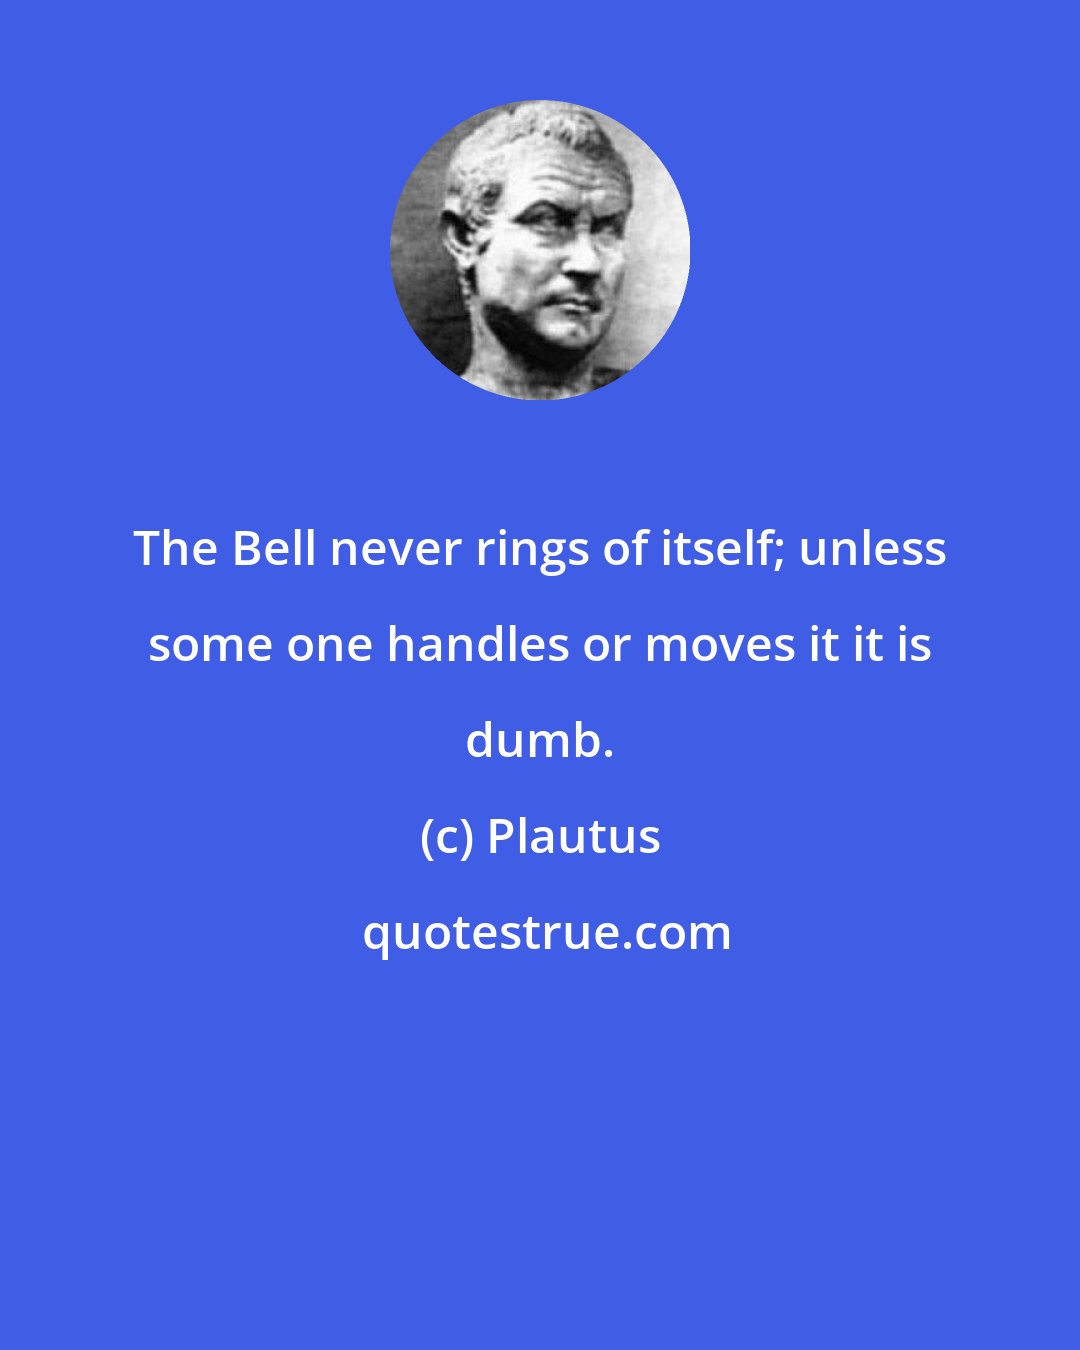 Plautus: The Bell never rings of itself; unless some one handles or moves it it is dumb.